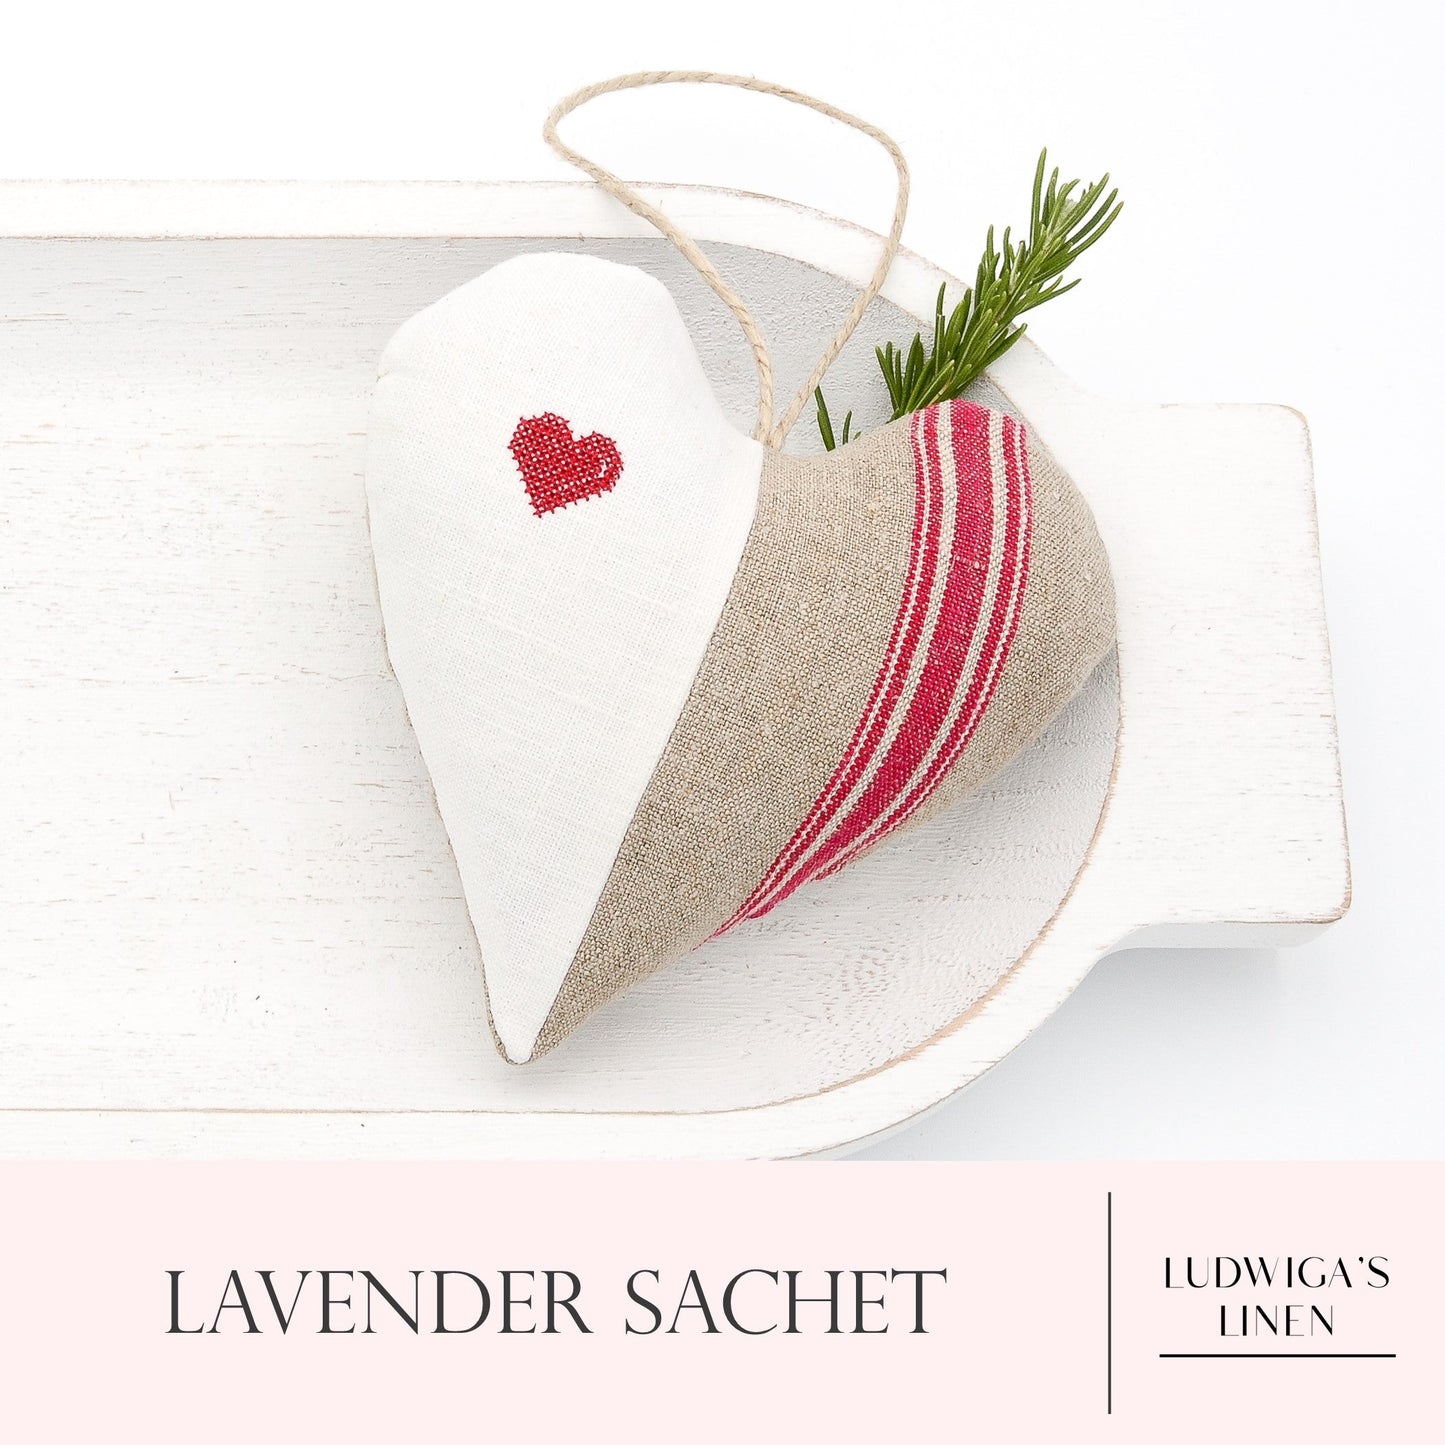 Antique/vintage linen lavender sachet heart with red embroidered heart, red-striped vintage German linen, hemp twine tie and filled with high quality lavender from Provence France